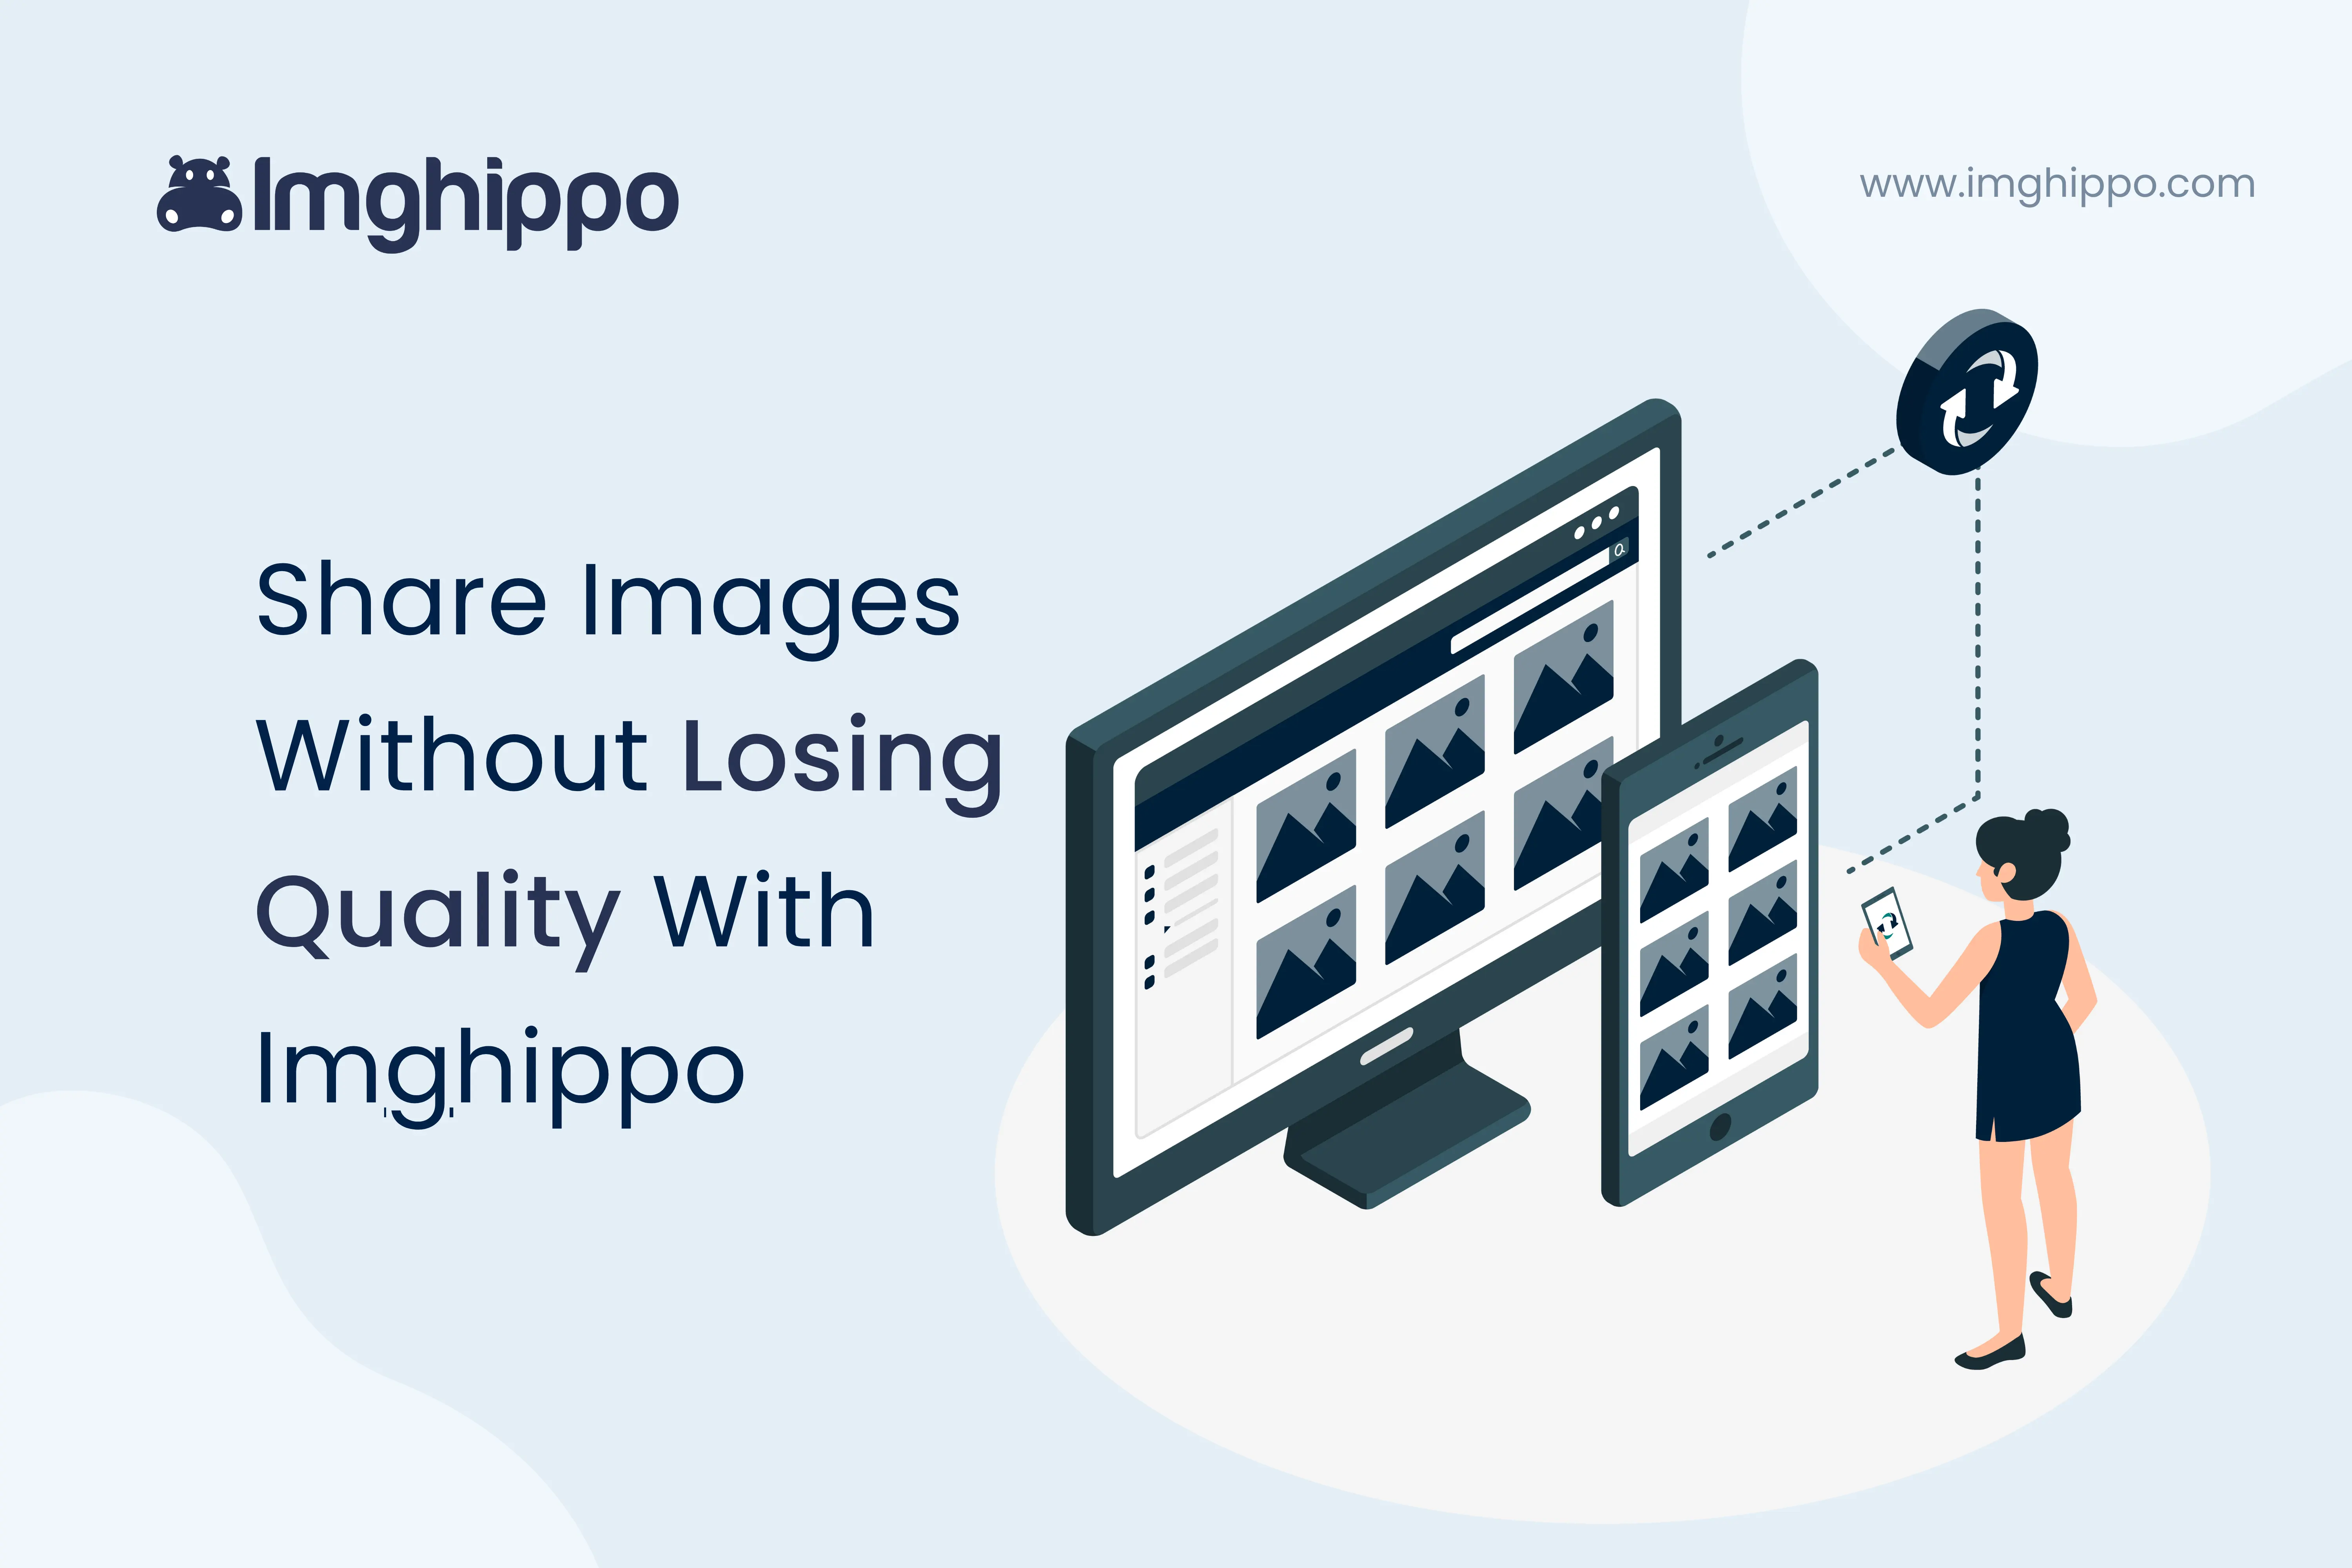 Share Images Without Losing Quality With Imghippo